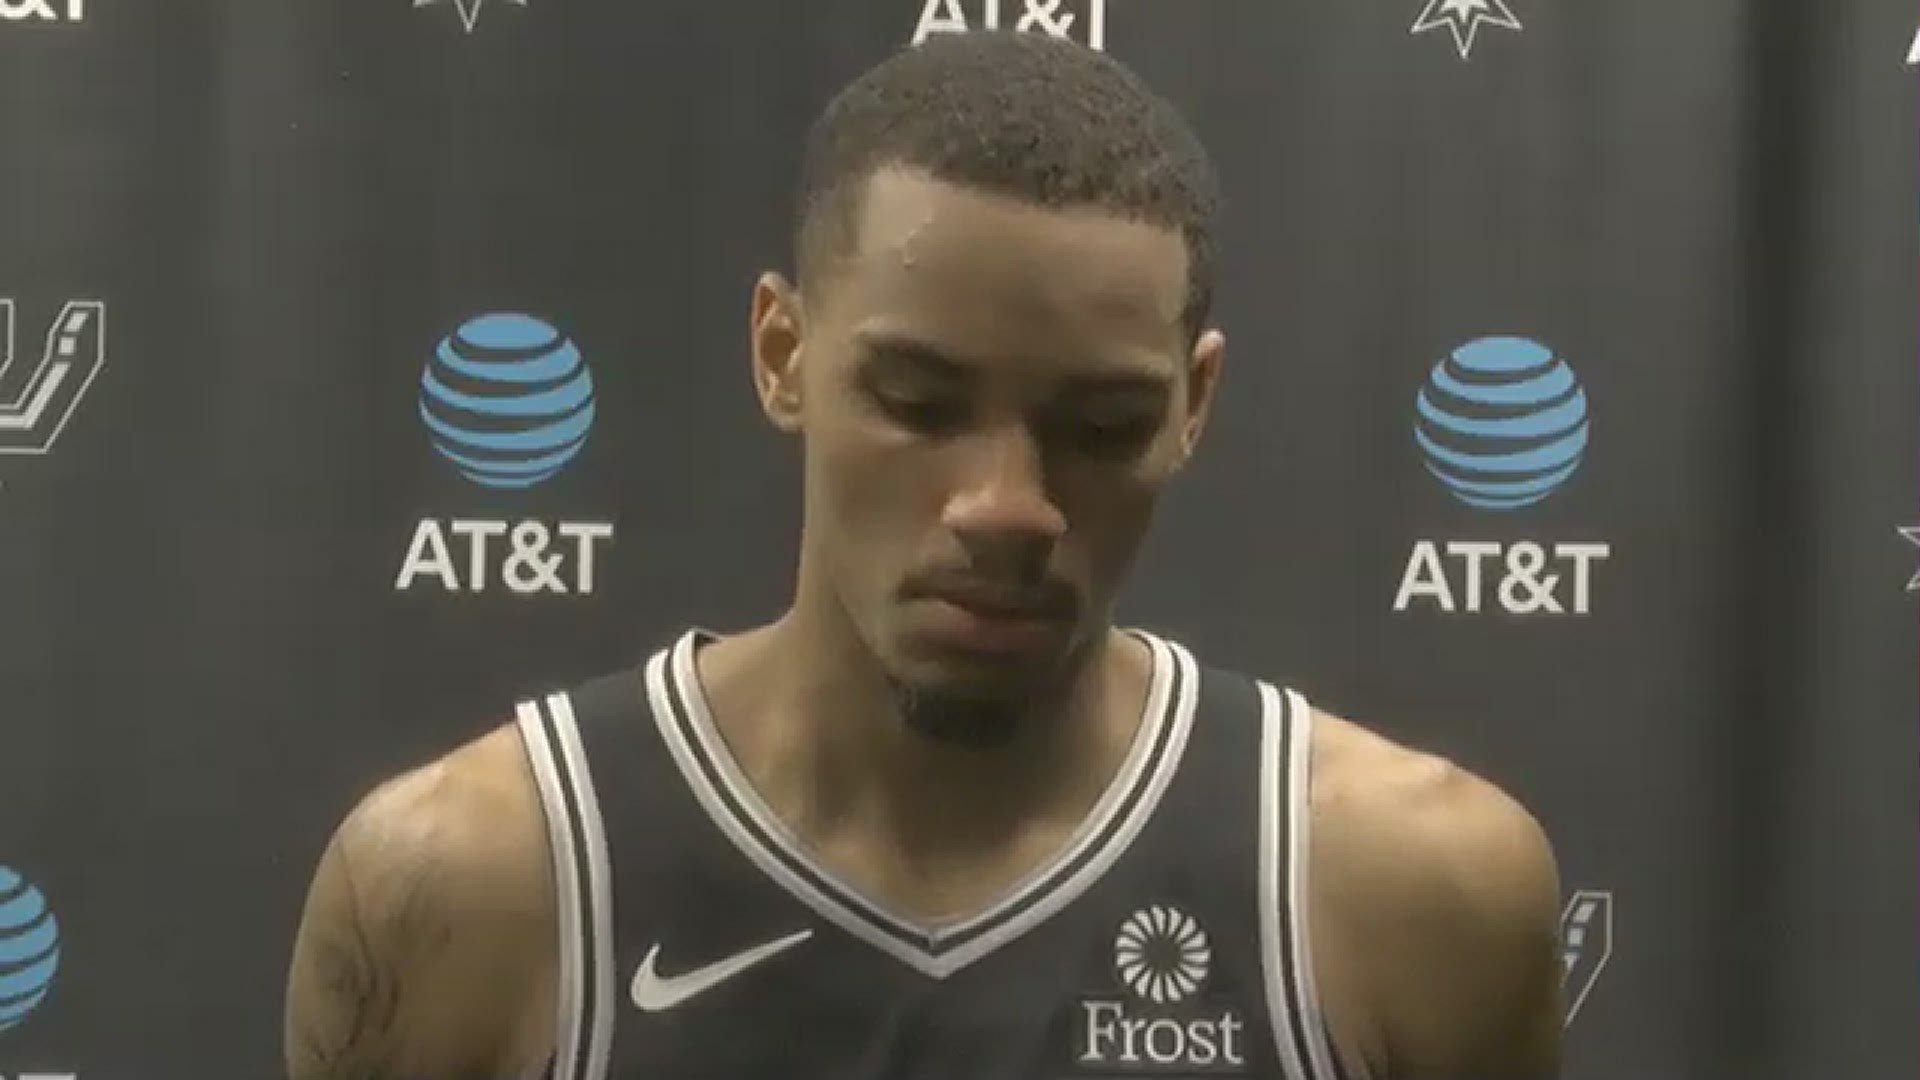 Murray spoke about the basketball court being DeRozan's happy place after he had 32 points and 11 assists in his first game back since his father passed away.